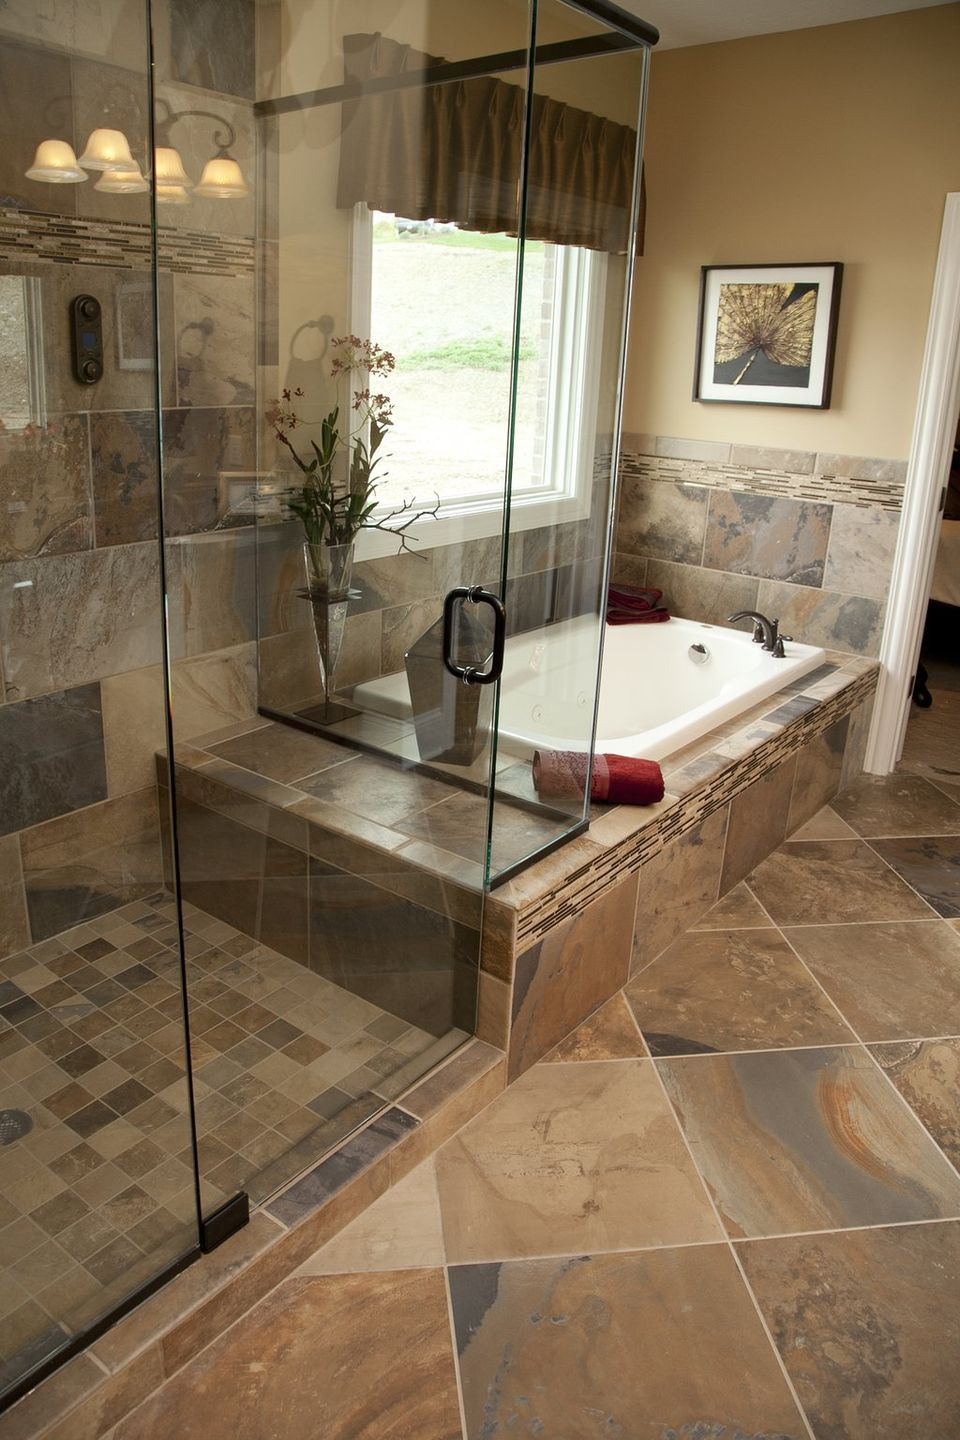 Stone Floor Tiles Bathroom
 33 stunning pictures and ideas of natural stone bathroom